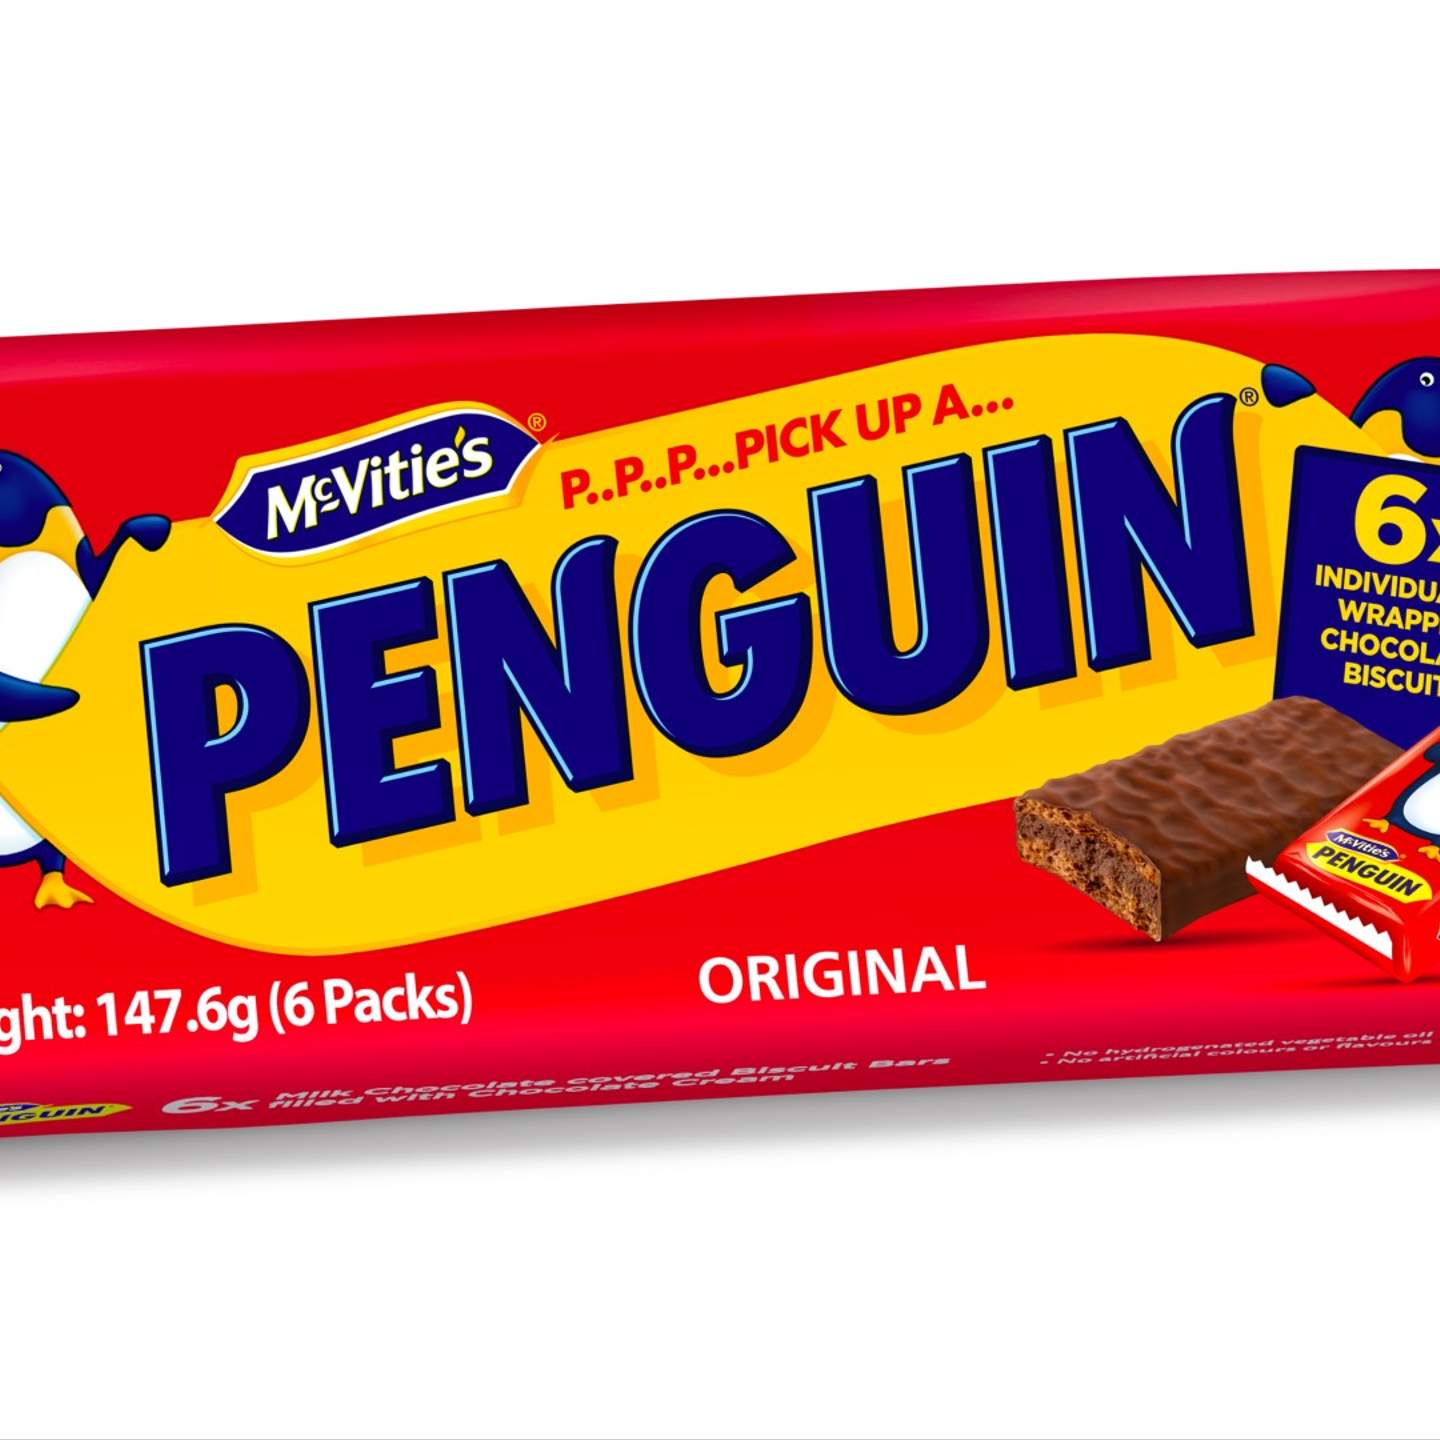 Britain's Iconic Penguin Chocolate Biscuit Has Landed in Australian  Supermarkets - Concrete Playground